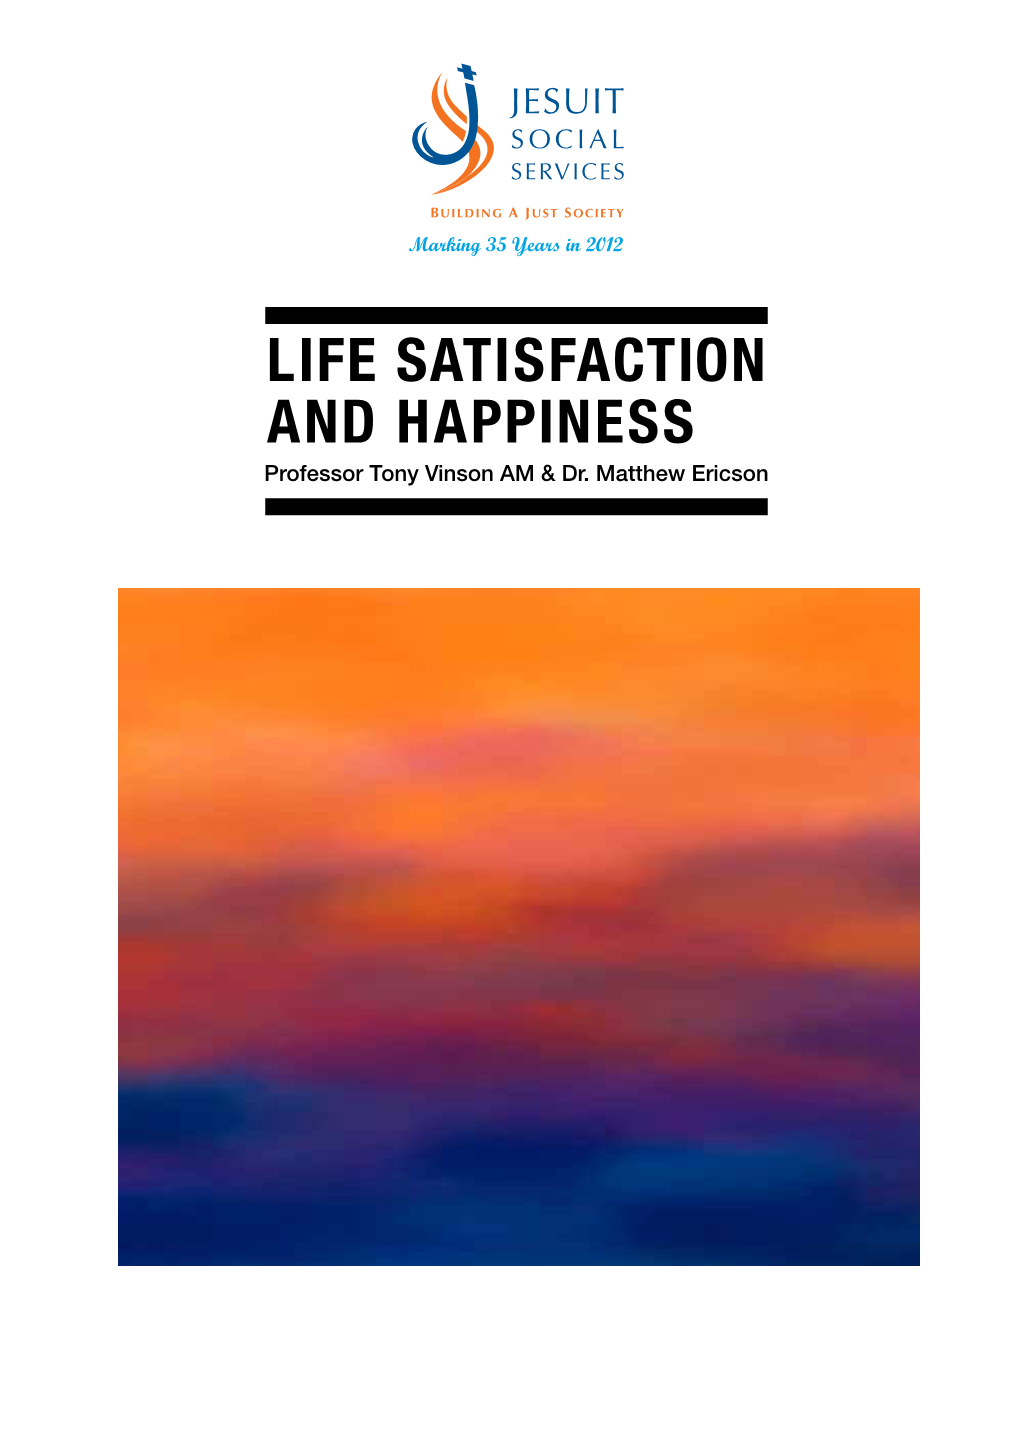 LIFE SATISFACTION and HAPPINESS Professor Tony Vinson AM & Dr